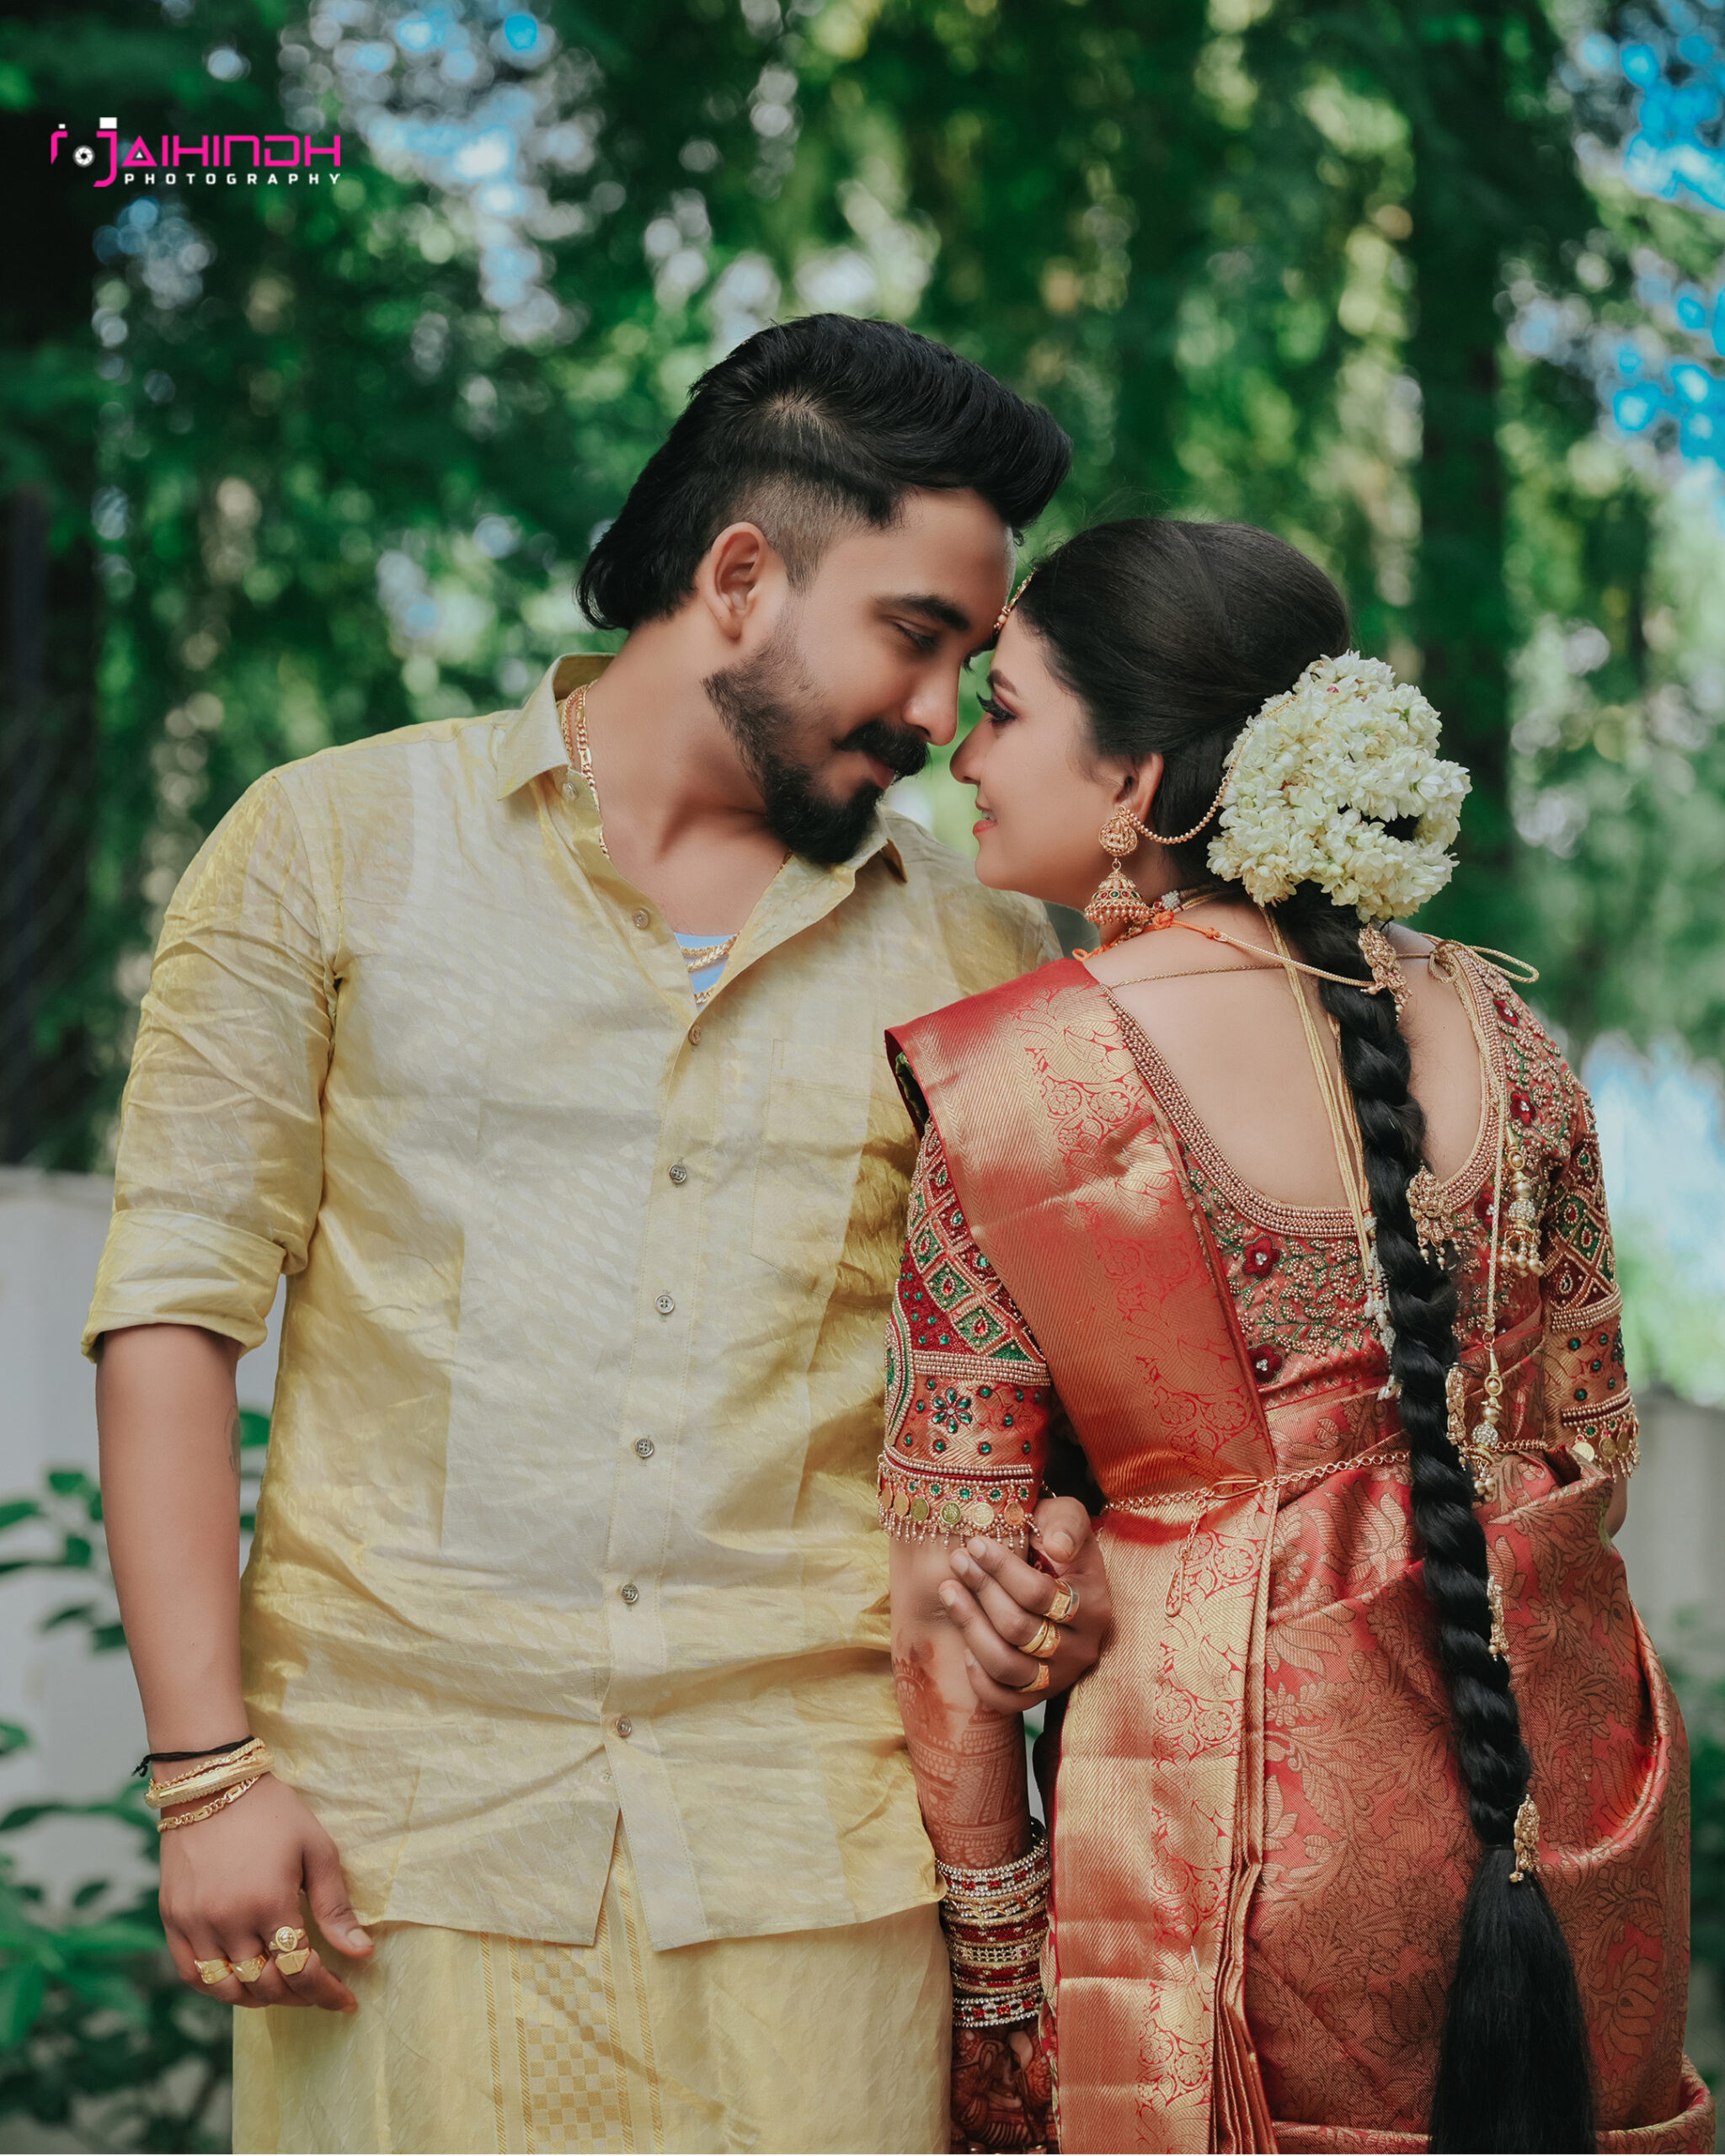 Red Veds: Best Couple Poses for Indian Wedding Photography